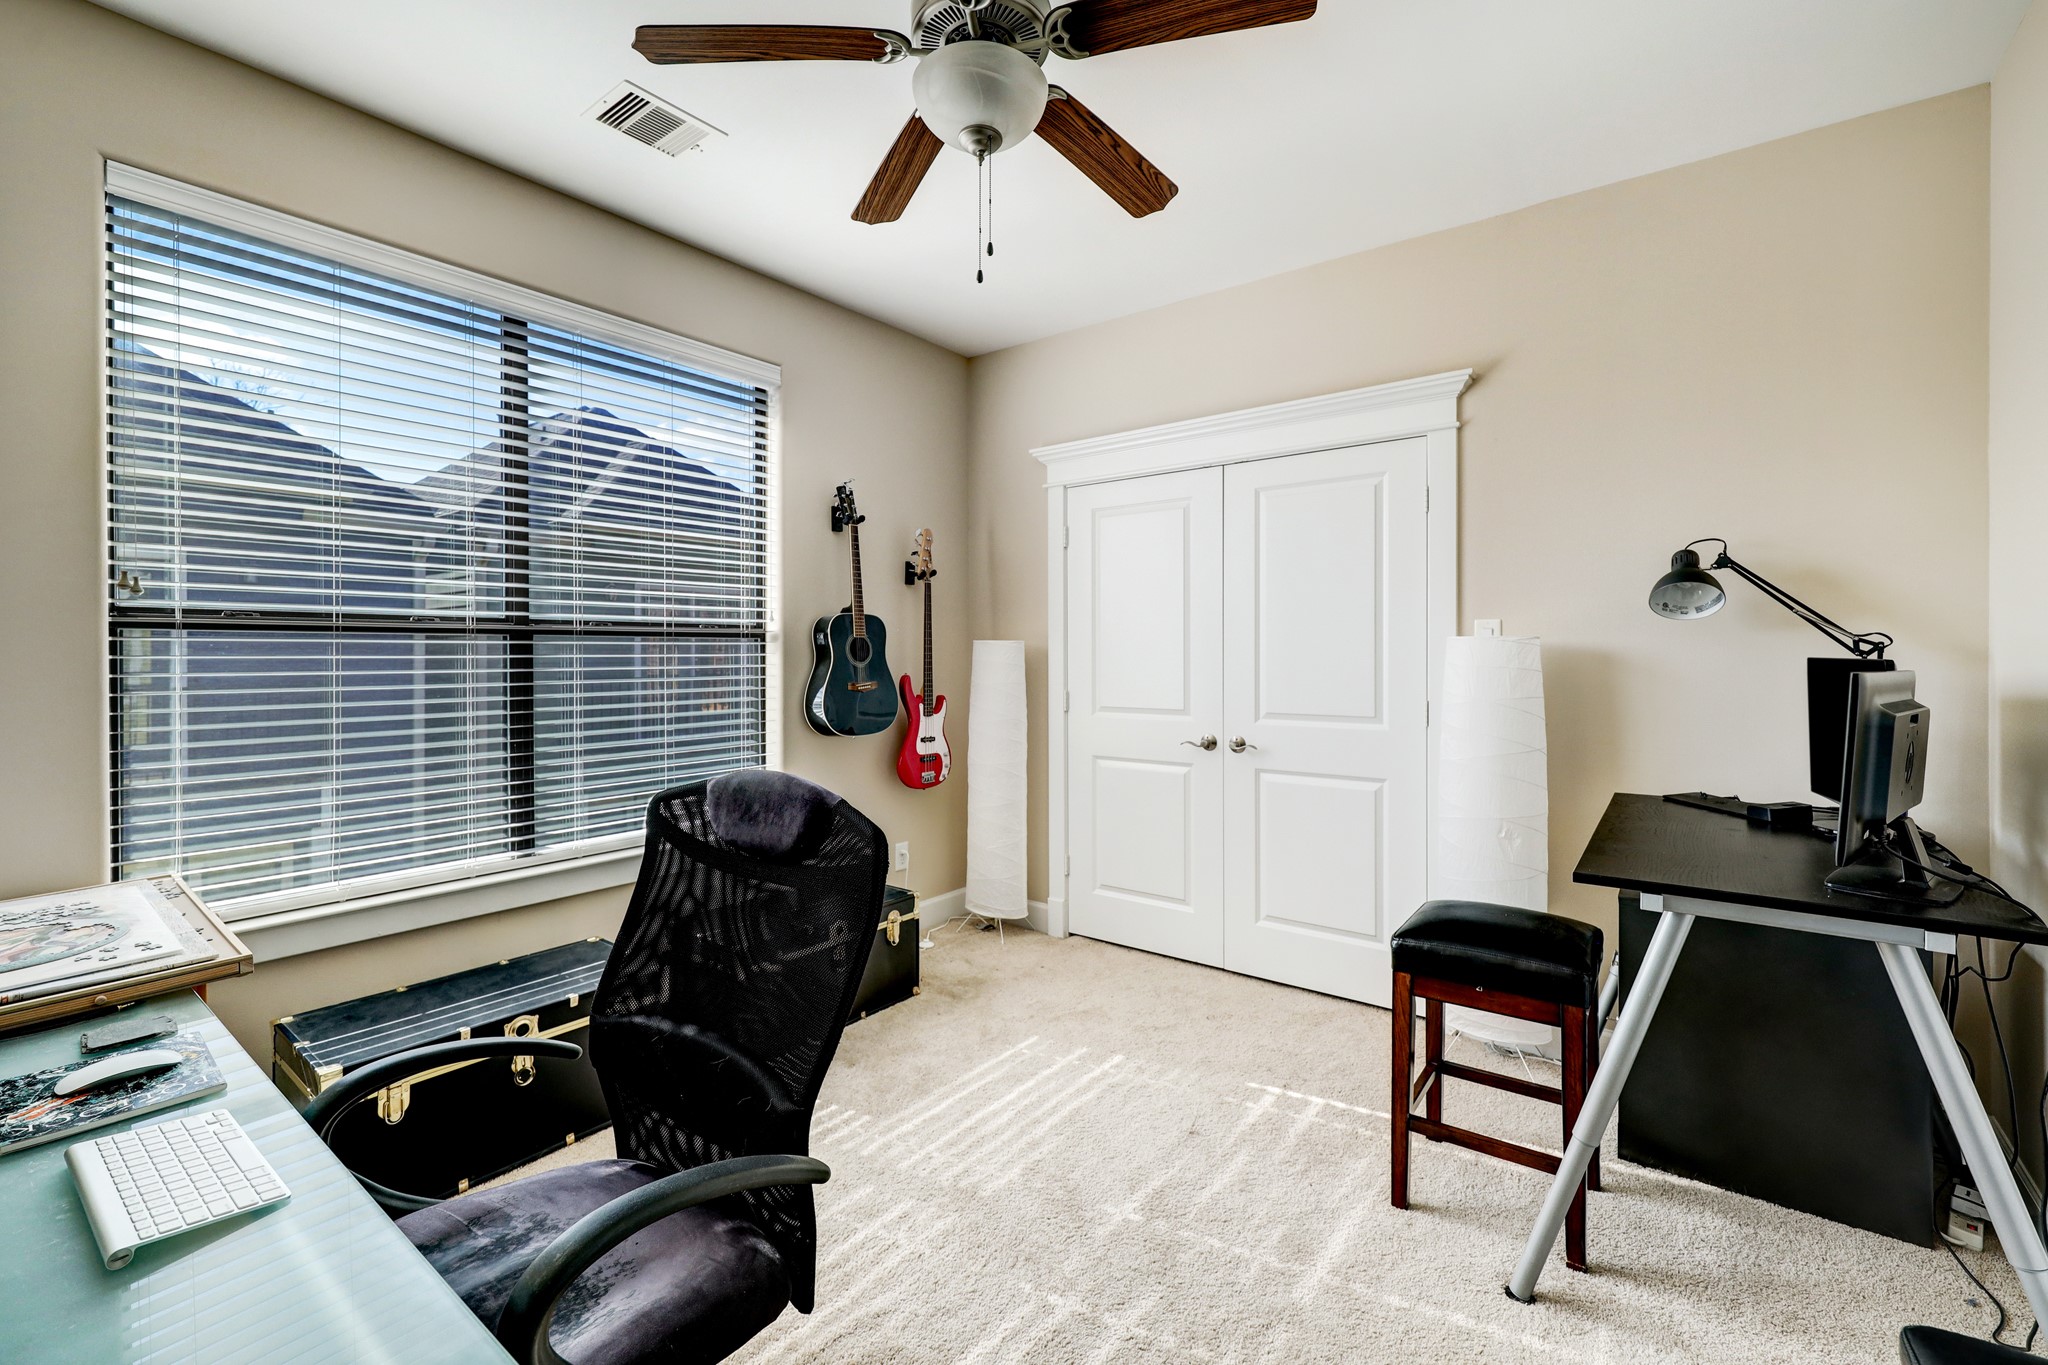 The secondary bedroom on the third floor is great location for an at home office or workout room!